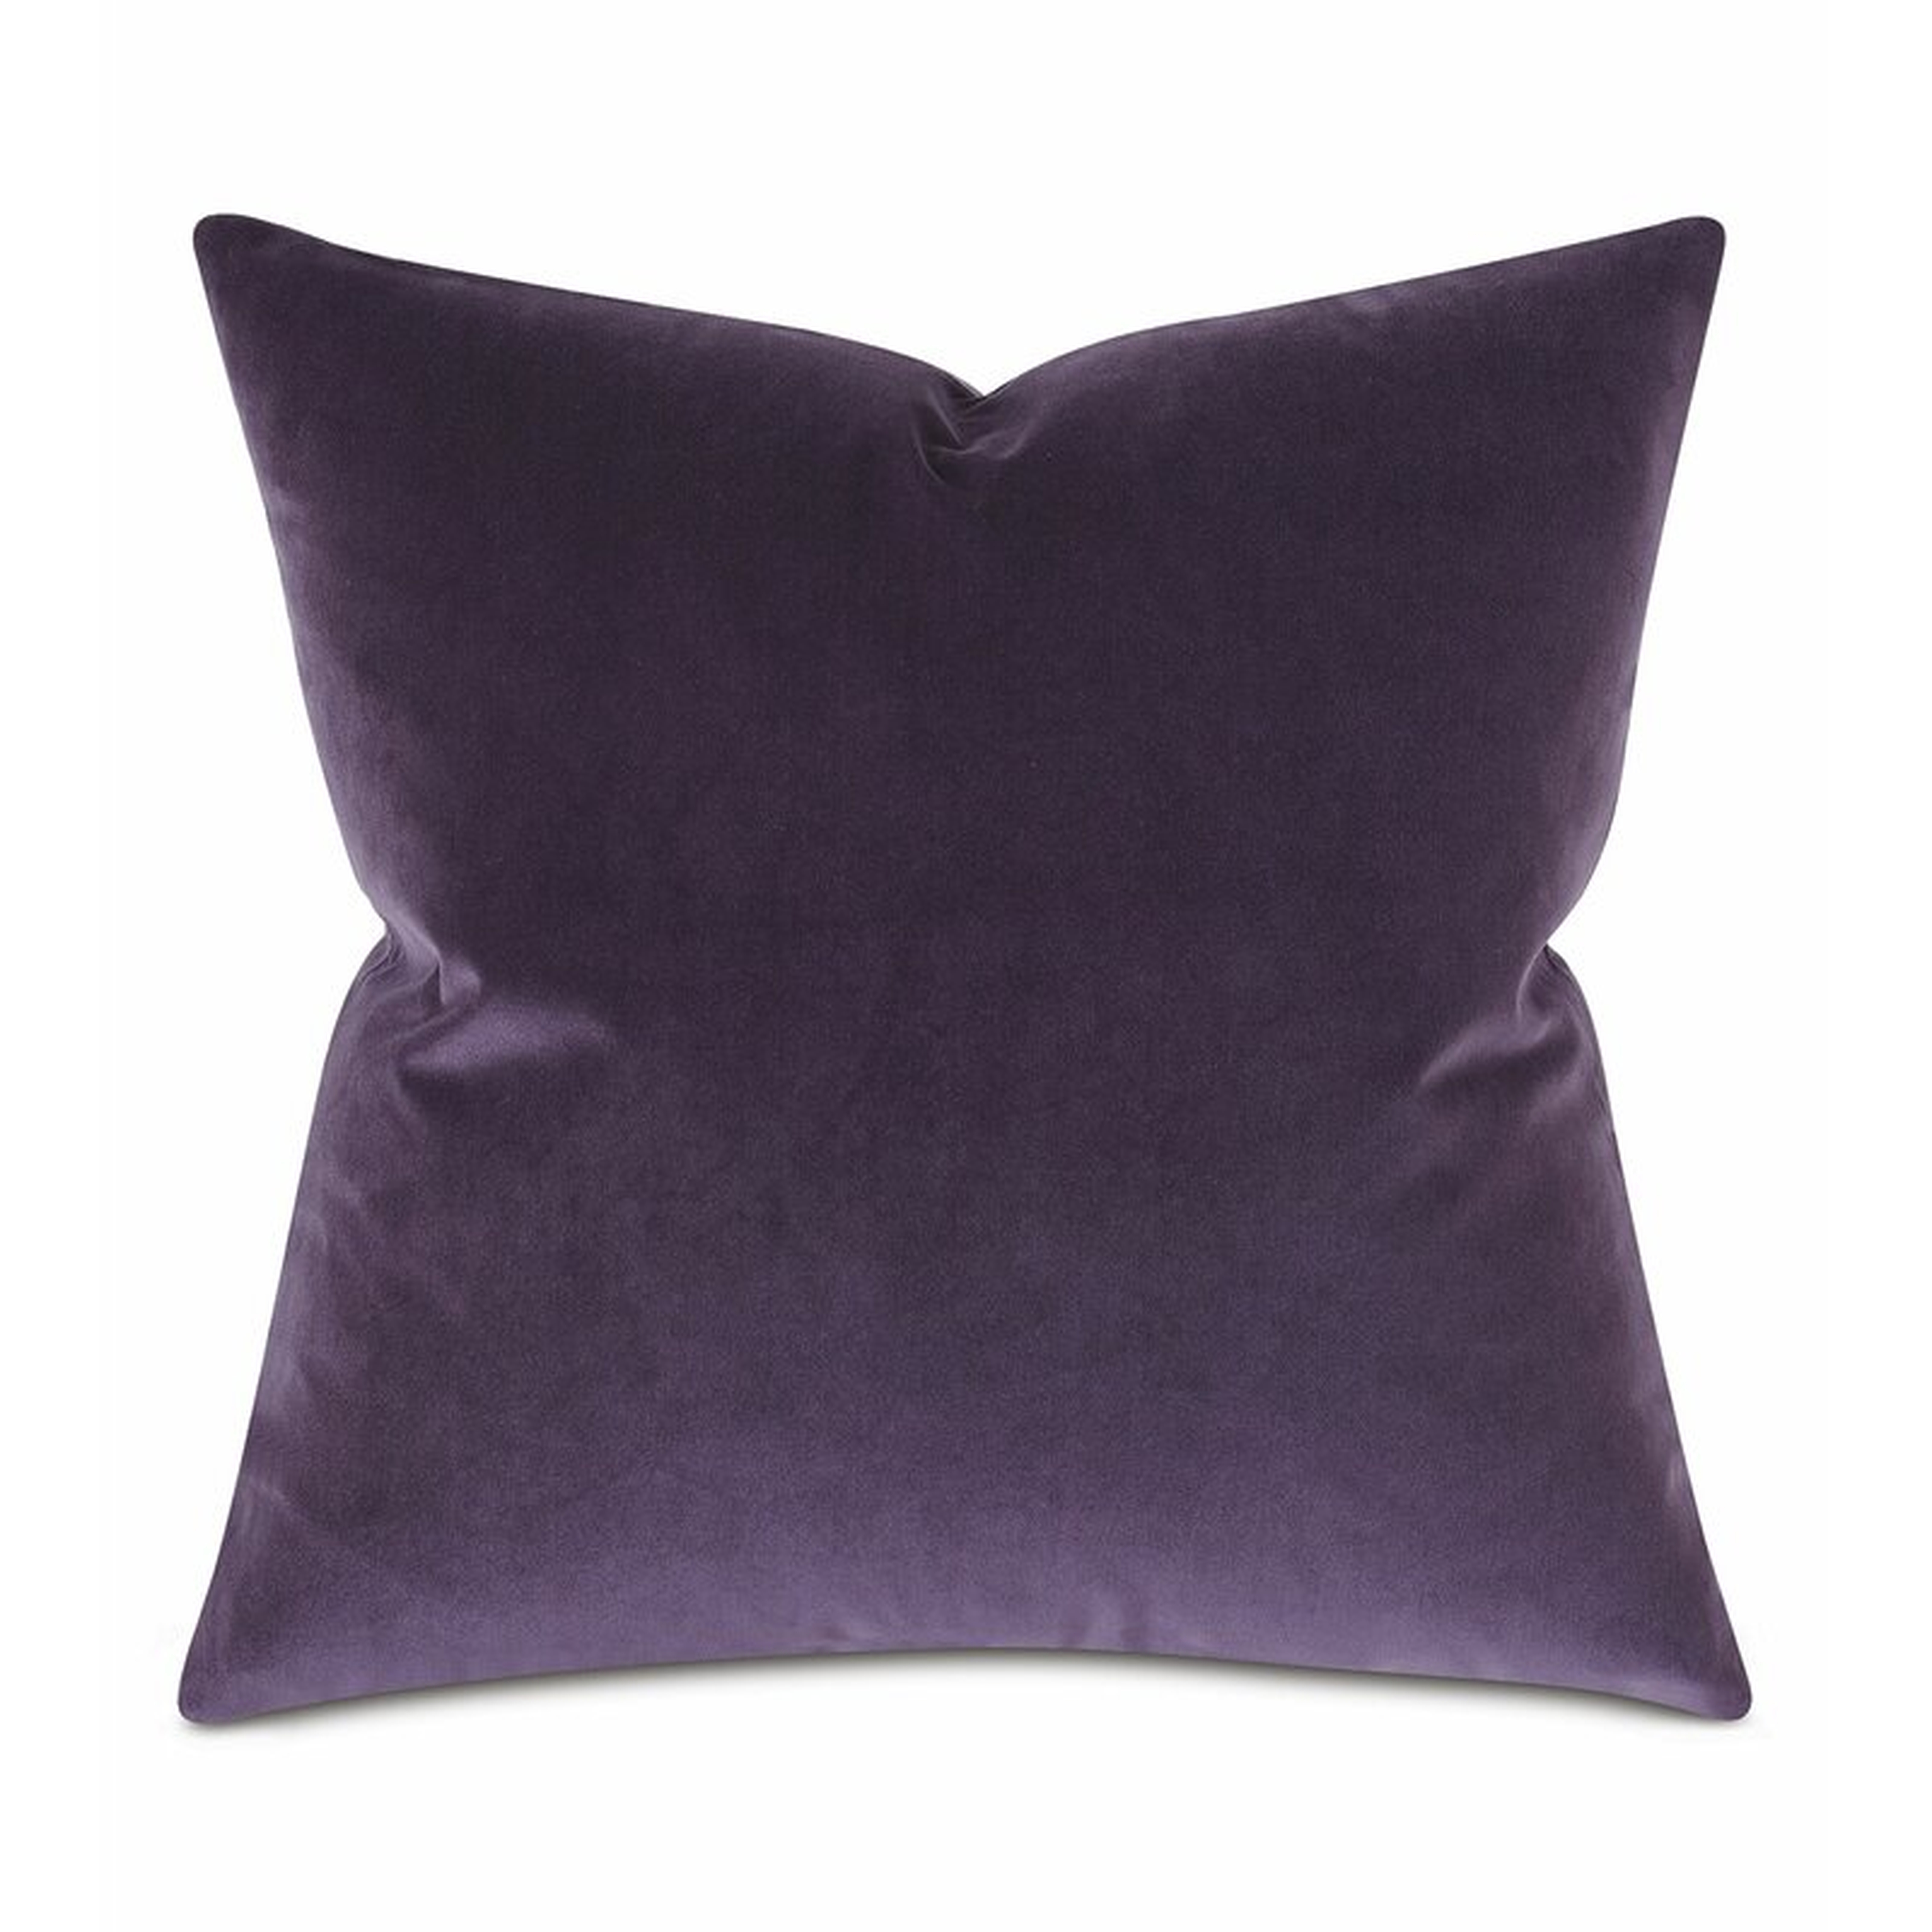 Eastern Accents Uma Square Pillow Cover & Insert - Perigold